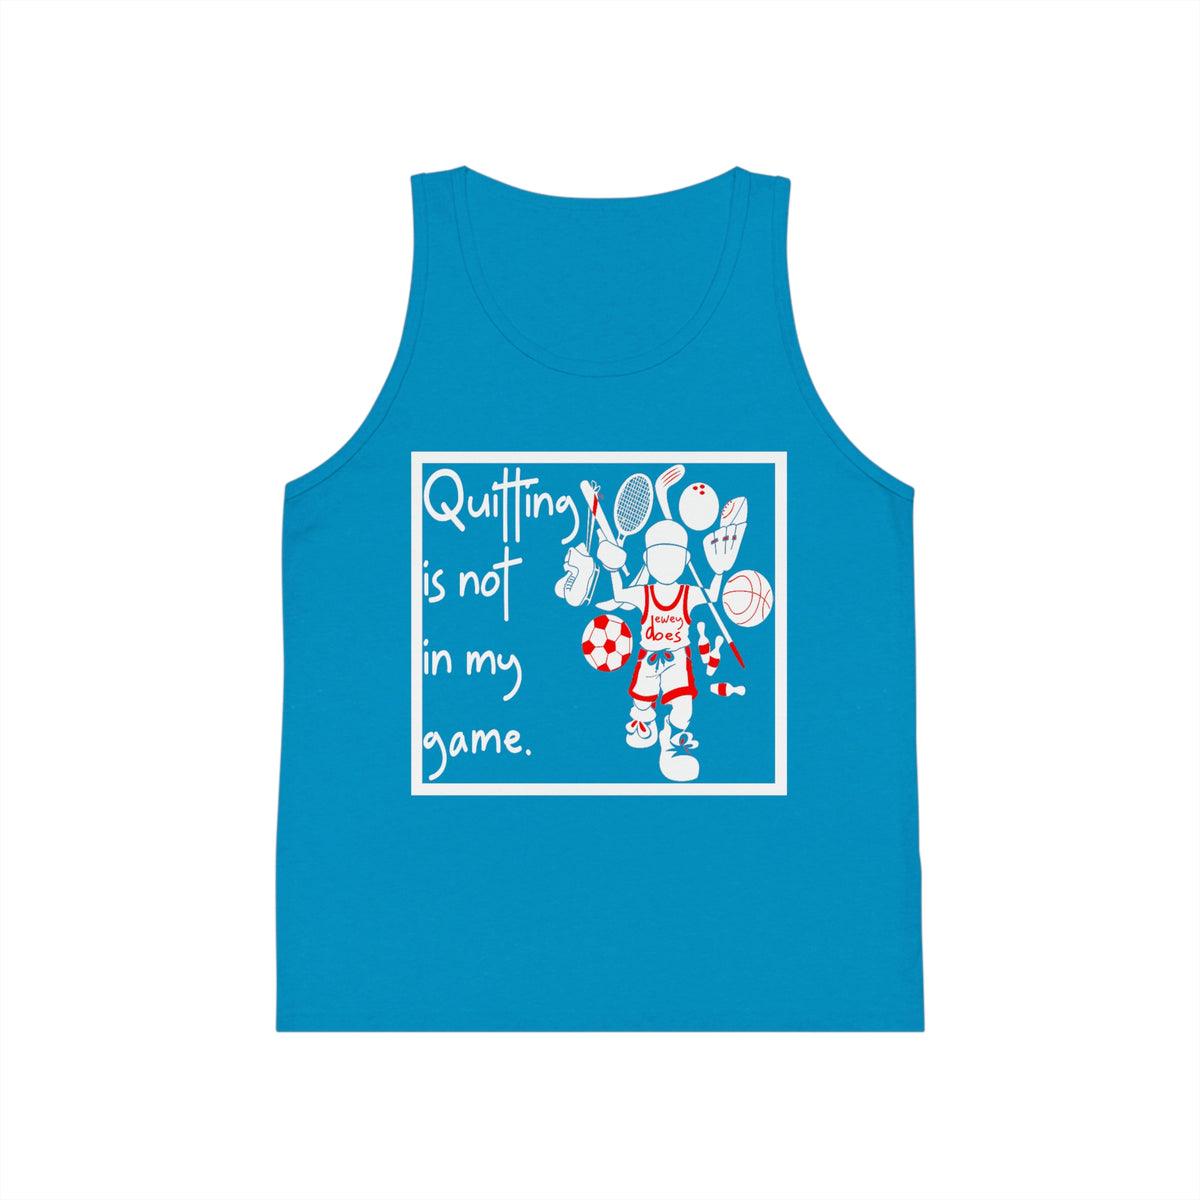 quitting is not in my game - kid's jersey tank top neon blue / l